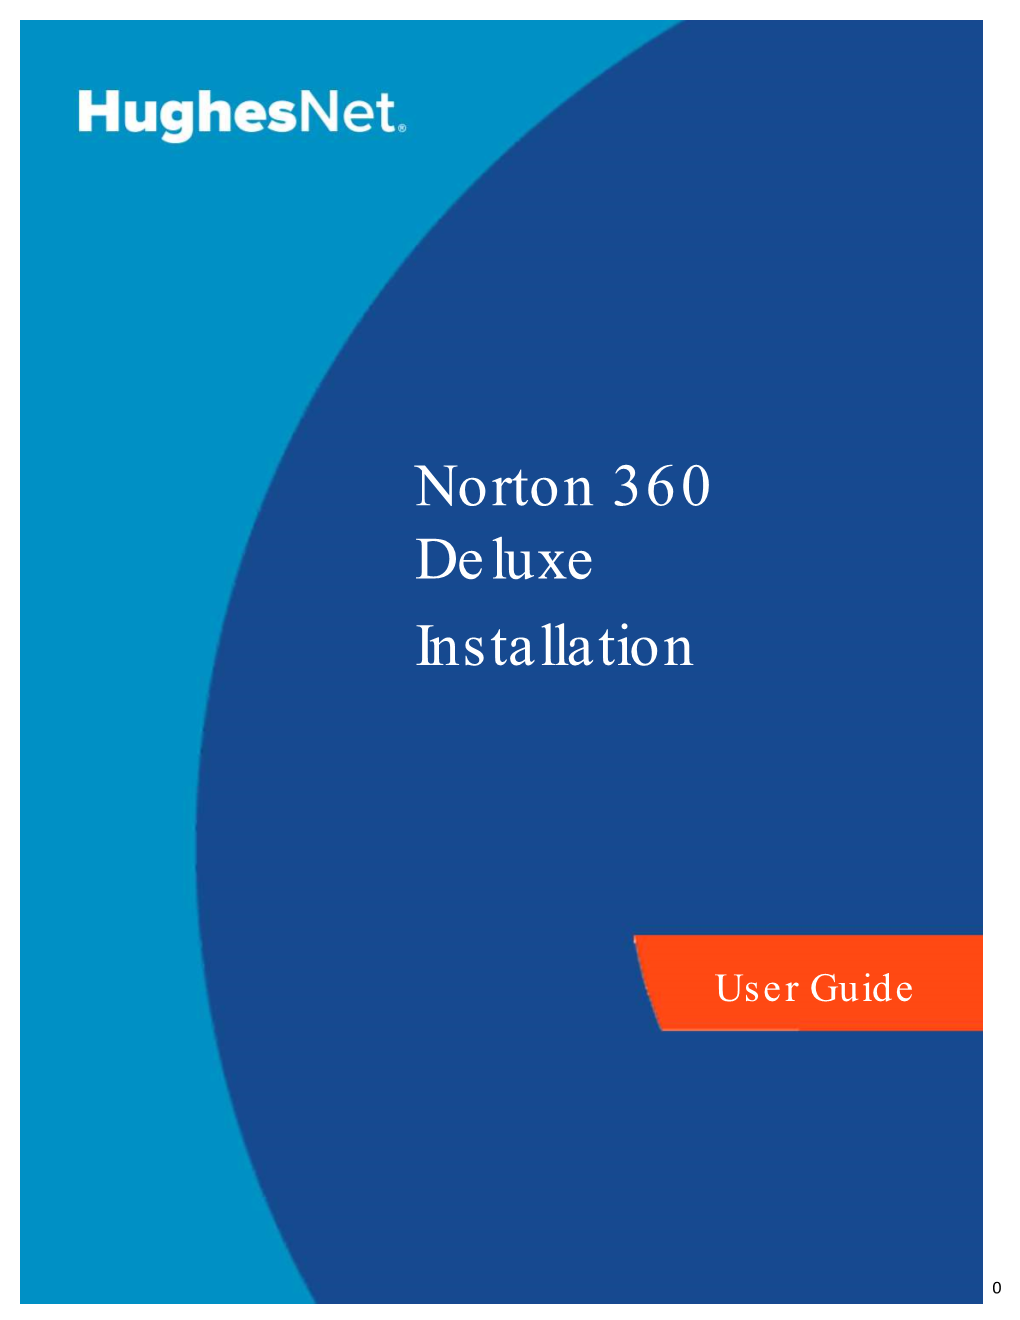 Norton 360 Deluxe Installation for Mac, PC, and Mobile Devices